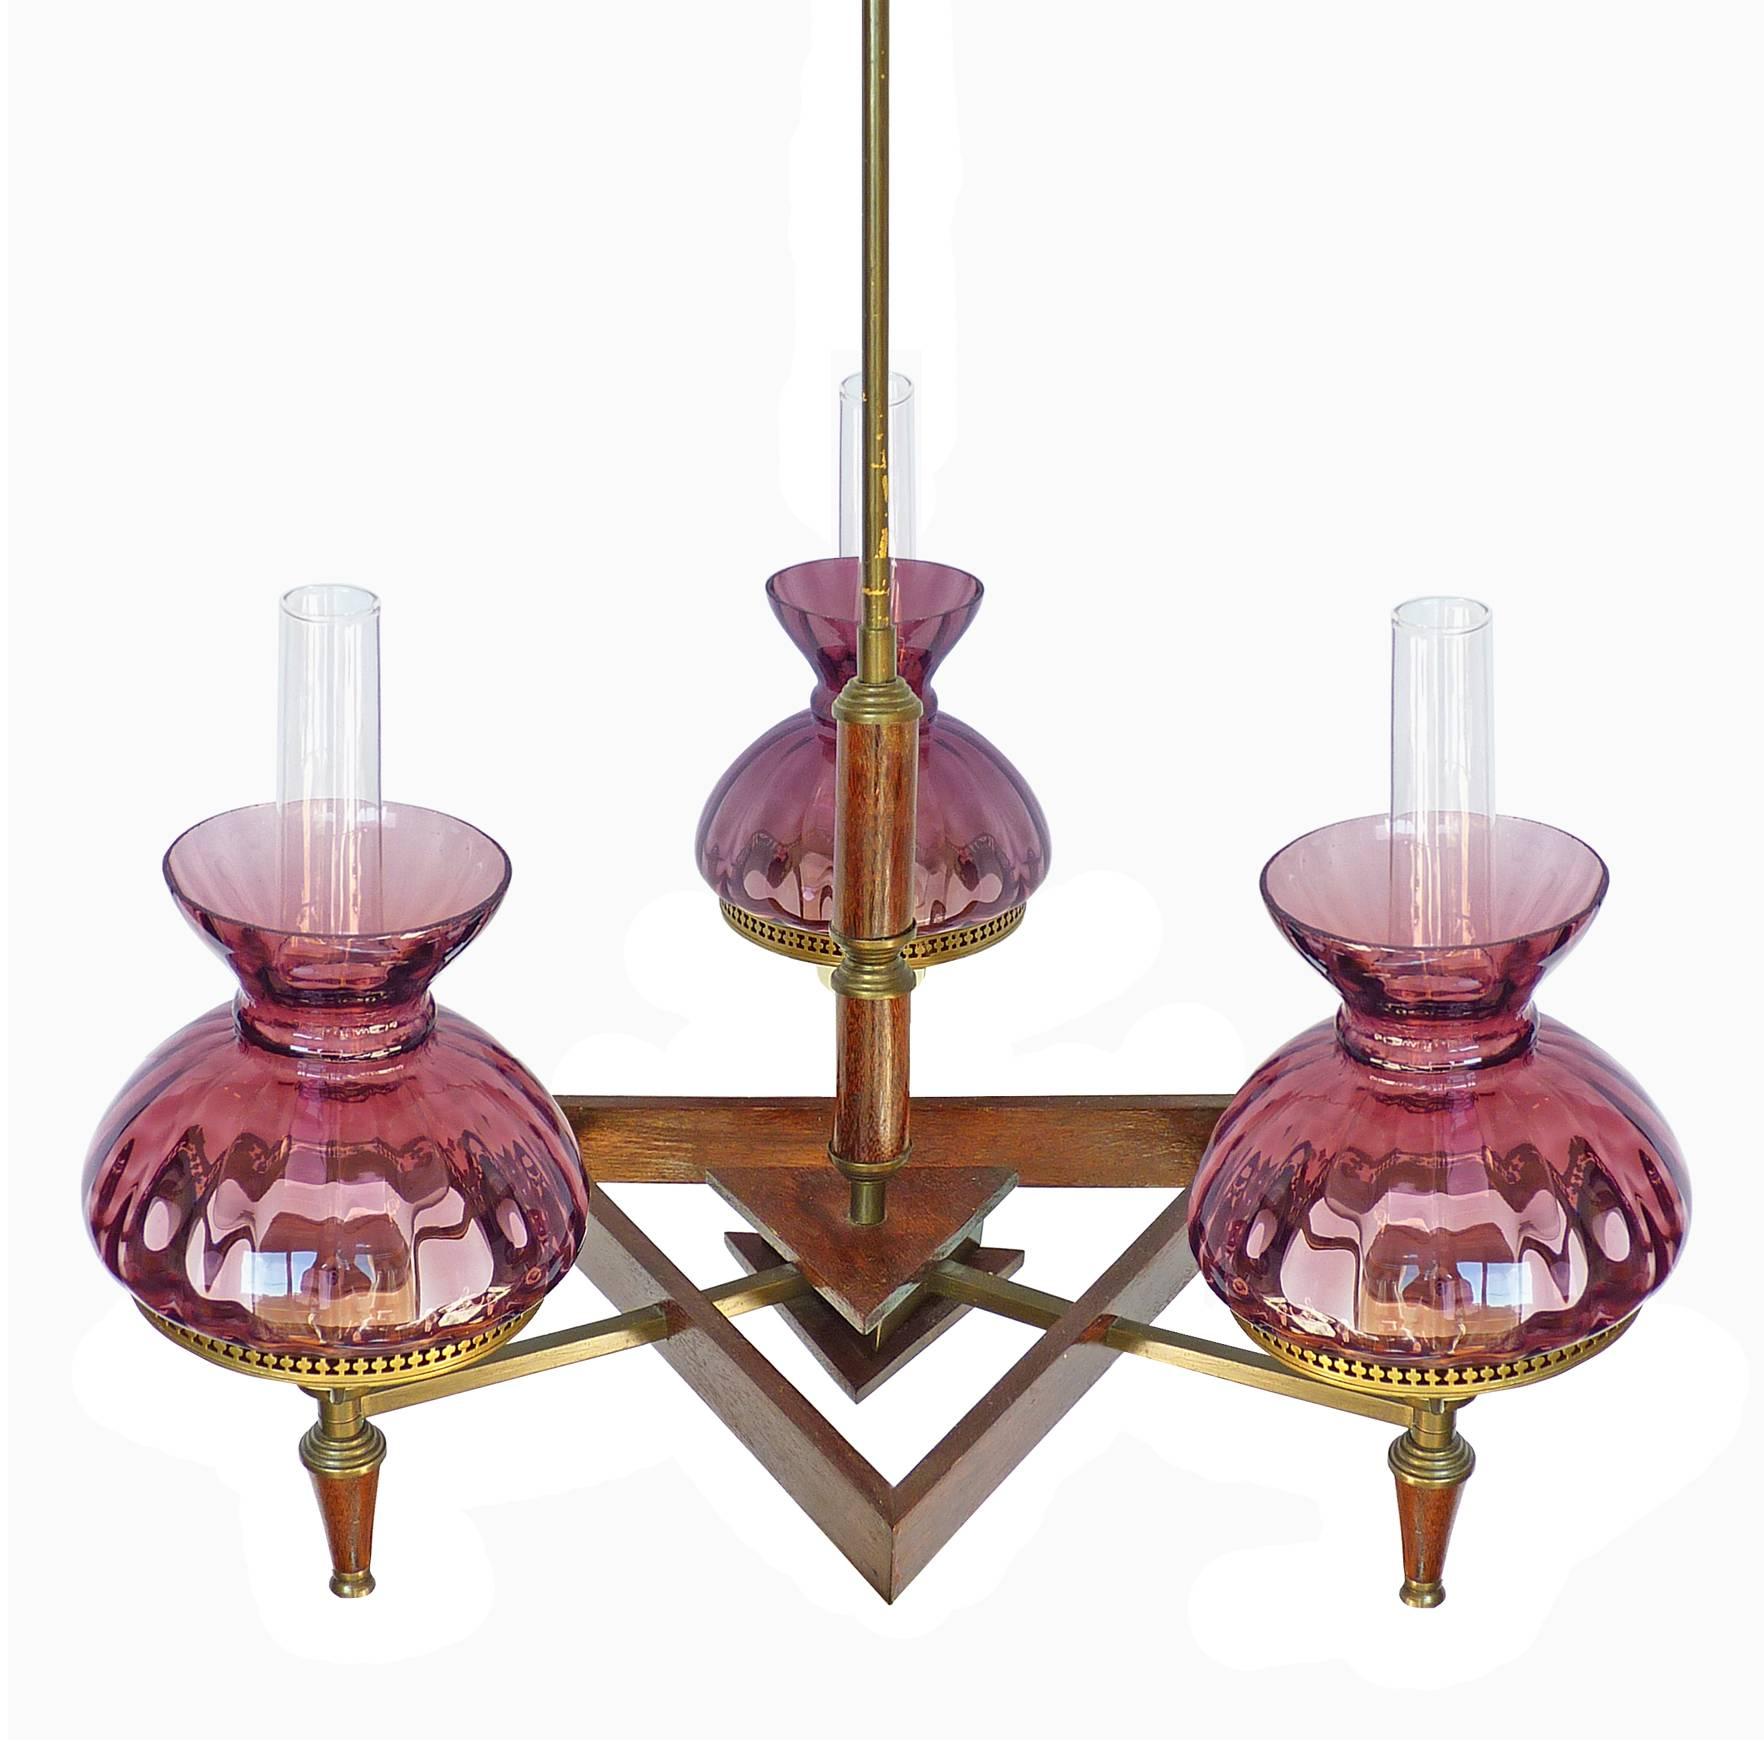 Antique French Art Deco purple amethyst glass shades / wood and brass / three-light chandelier.